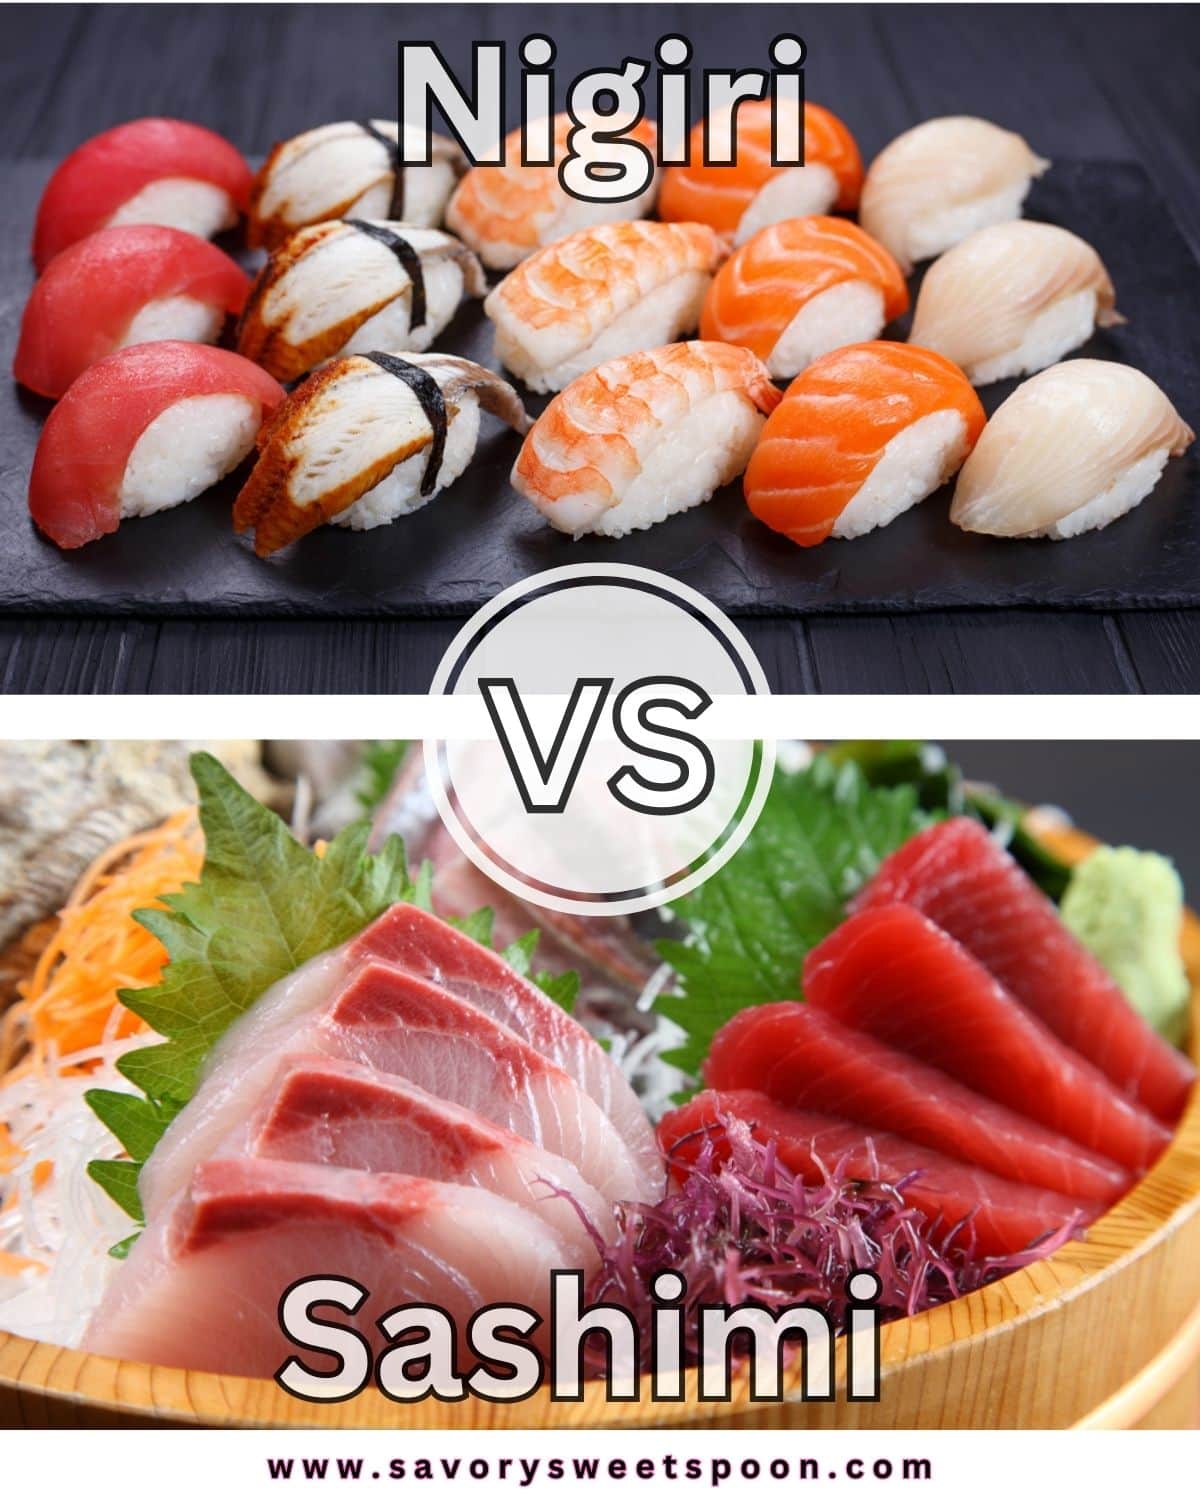 two photos: one of nigiri and one of sashimi for a side by side comparison.